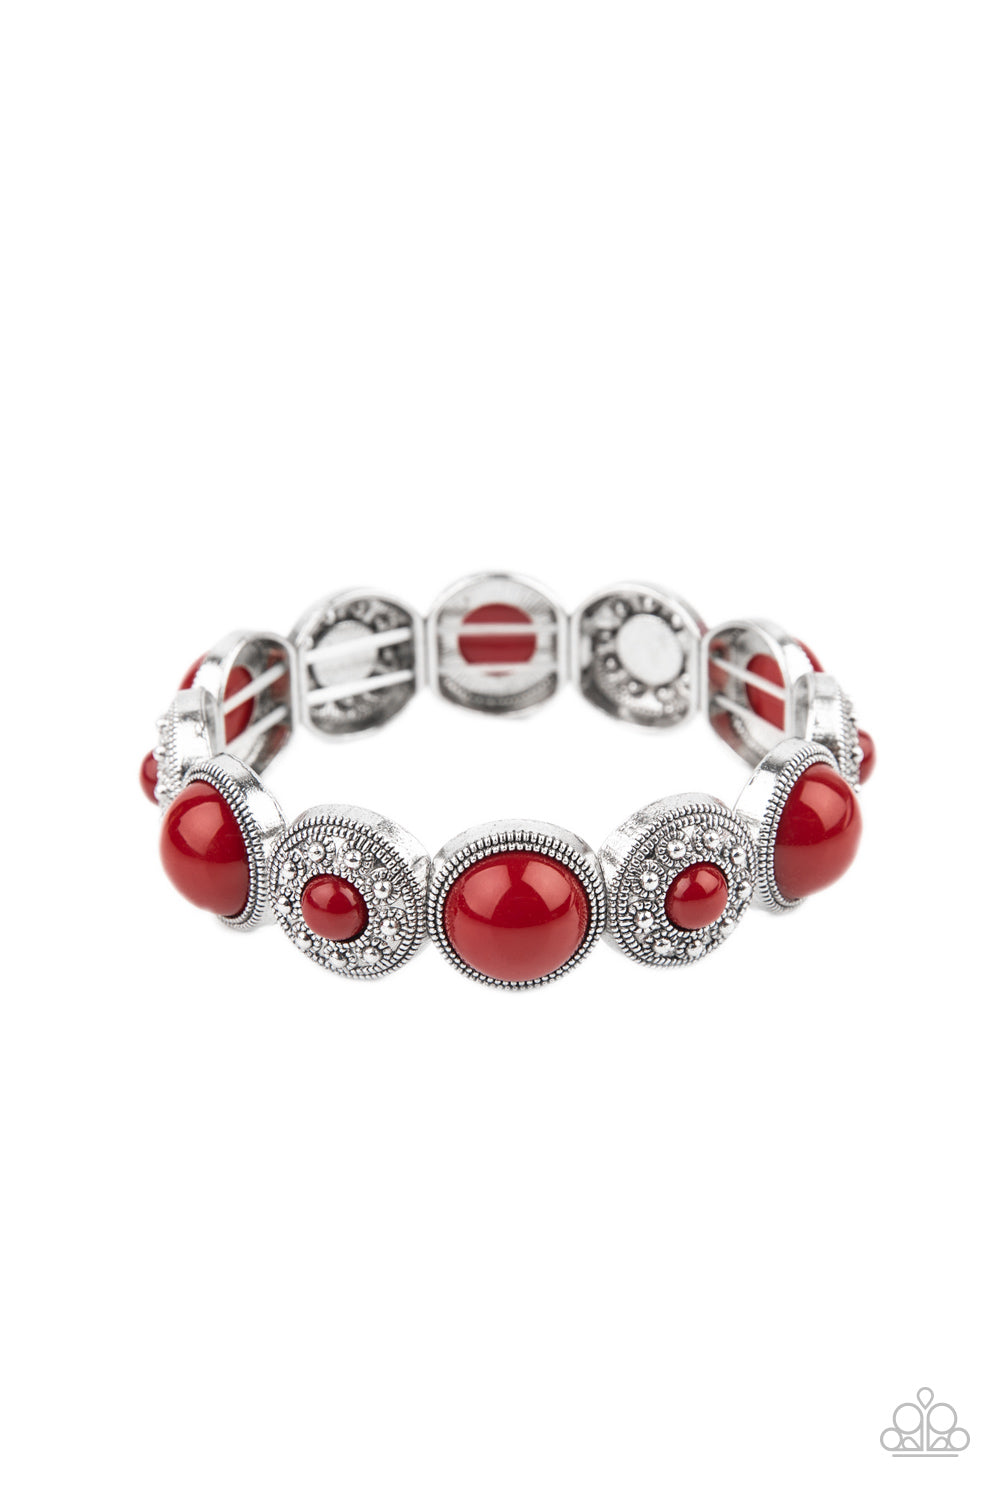 Garden Flair - Red - Spiffy Chick Jewelry